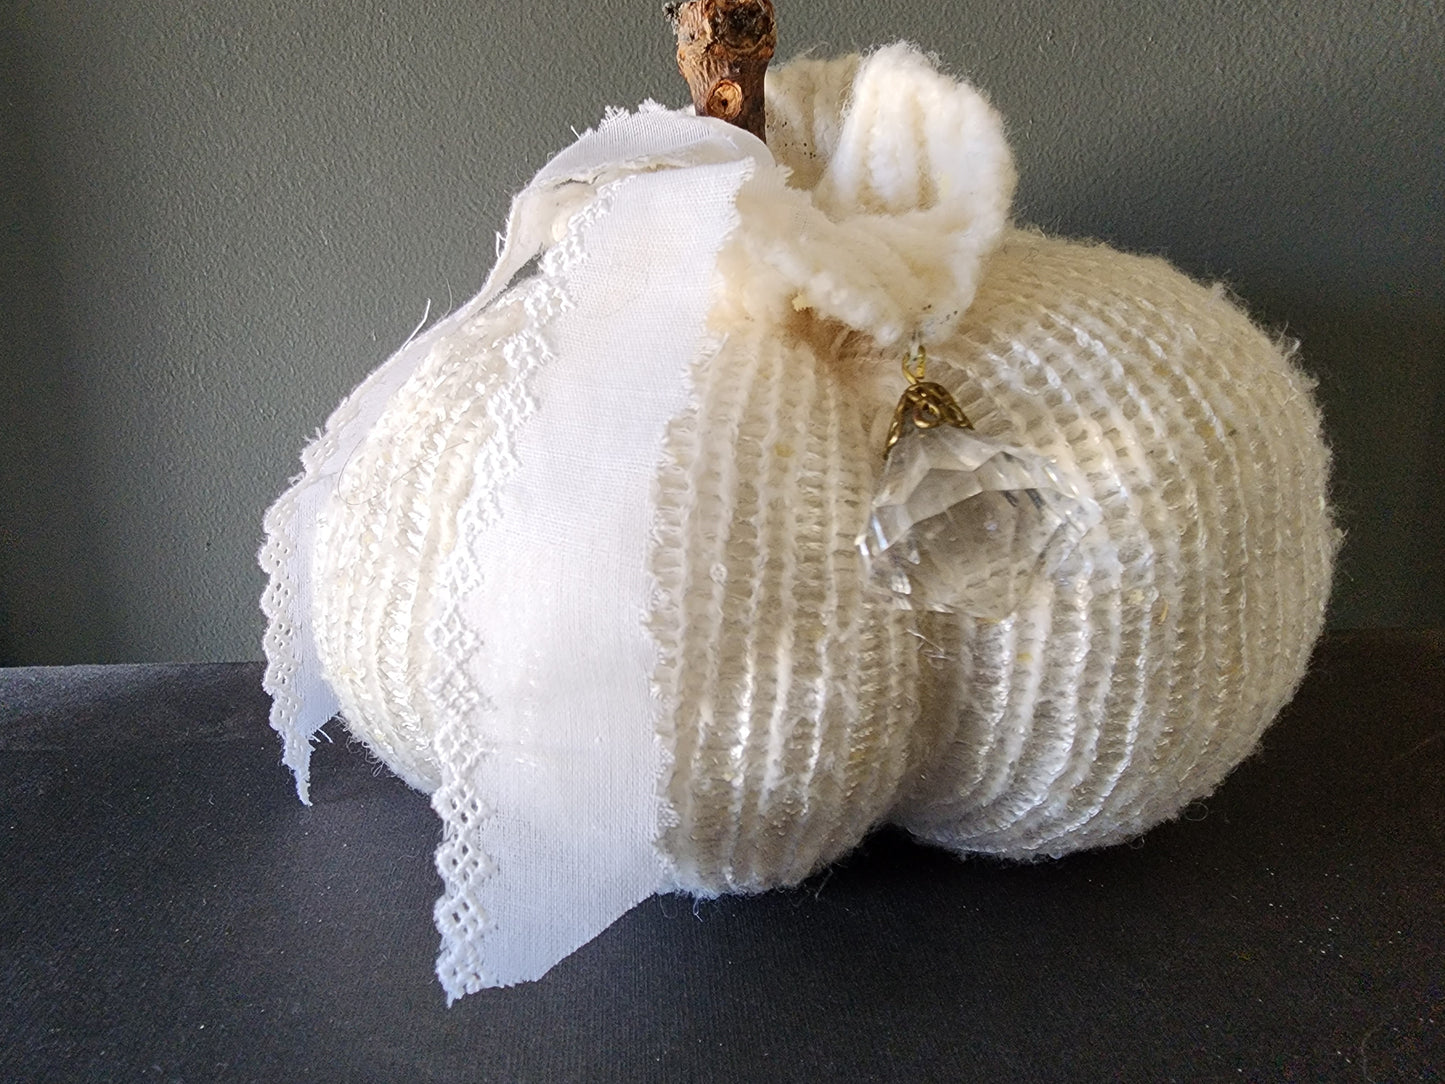 Creamy White Knit Pumpkin PIllow Pouf with Vintage Lace And Crystal